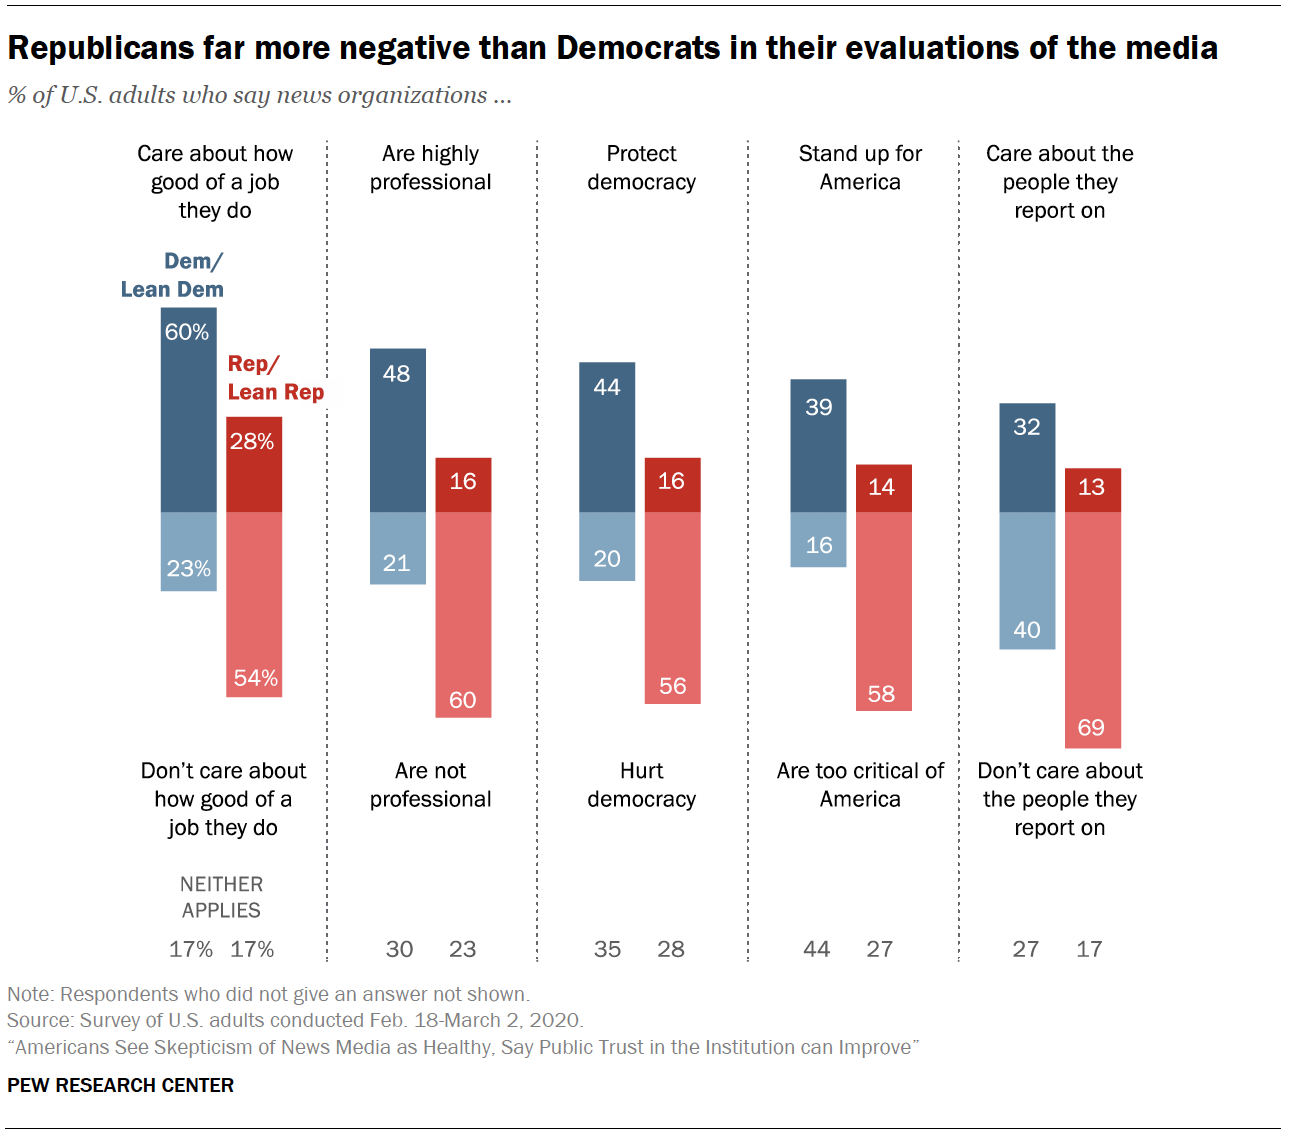 Republicans far more negative than Democrats in their evaluations of the media